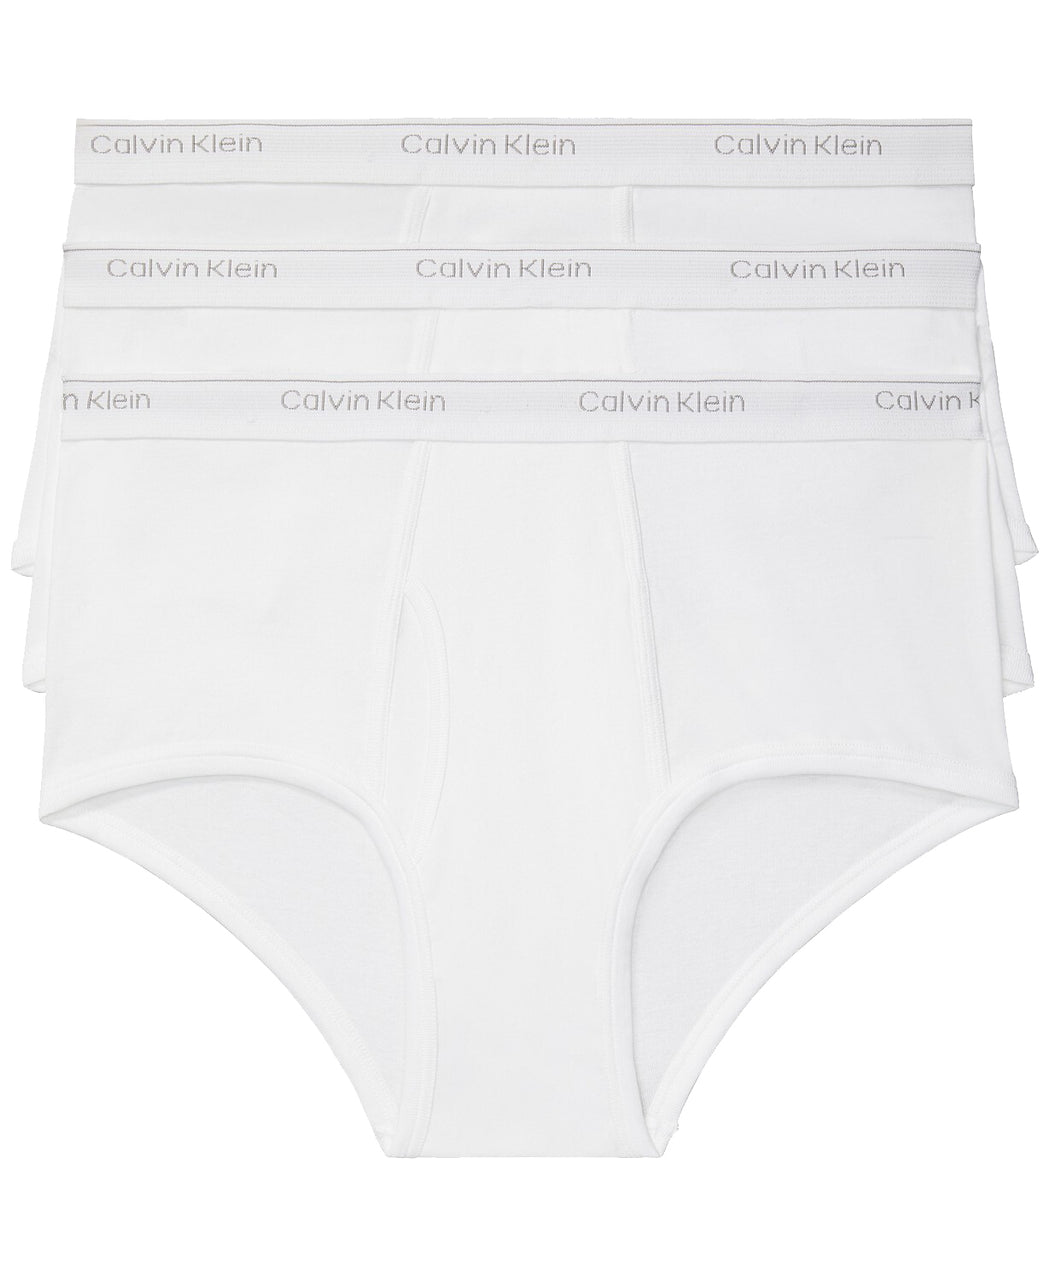 Classics Briefs Wanted Pack 3 Men\'s Cotton and Underwear Big – Calvin Tall Klein